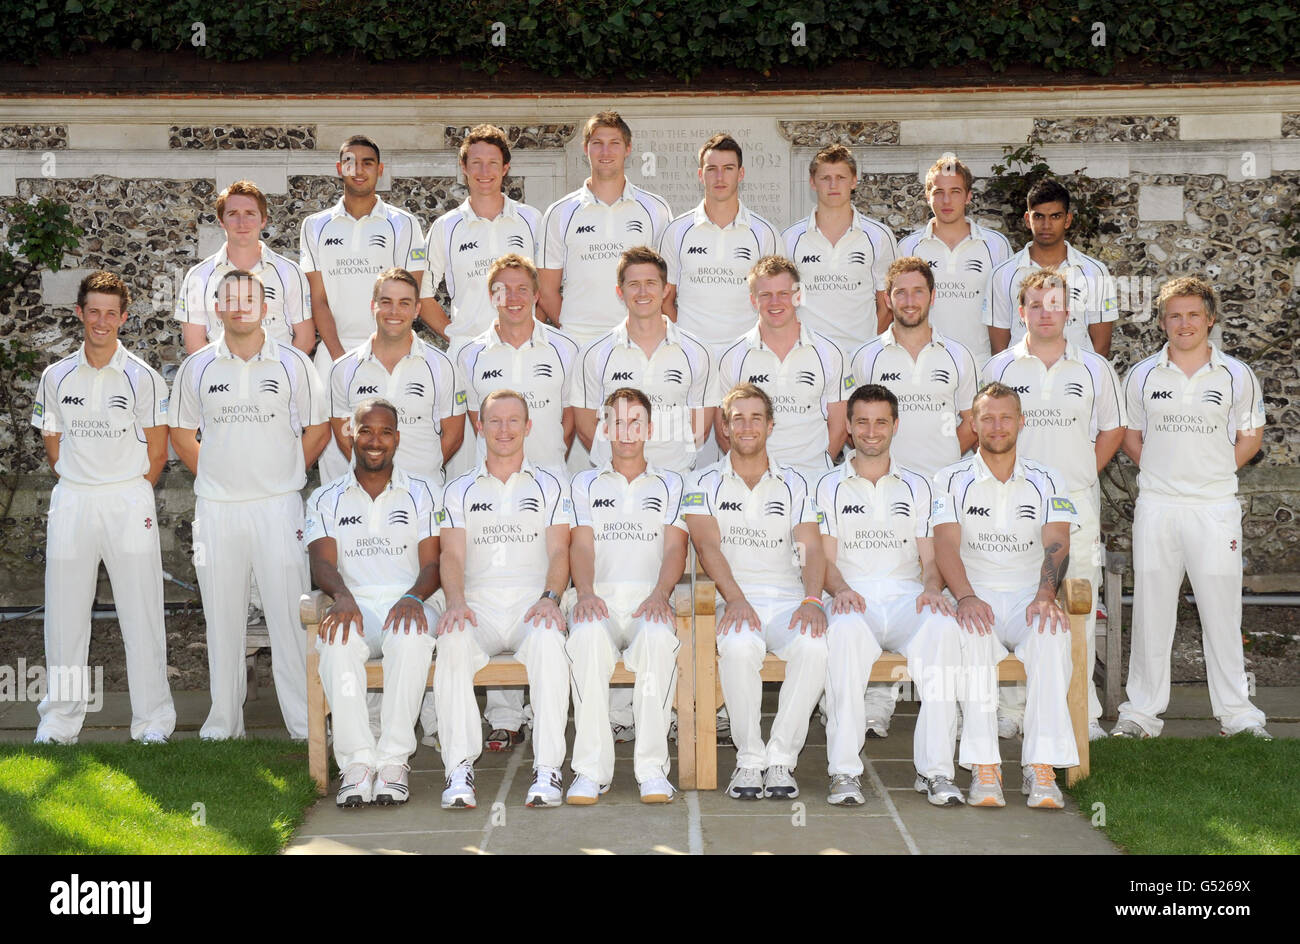 Middlesex Cricket Club pose for a team photograph in their County Championship kit during the press day at Lord's Cricket Ground, London (Back Row, left to right) Tom Smith, Gurjit Sandhu, Anthony Ireland, Ollie Rayner, Toby Roland-Jones, Ollie Wilkin, Josh Davey, Ravi Patel. (Middle Row, left to right) John Simpson, Adam Rossington, Tom Scollay, Robbie Williams, Joe Denly, Sam Robson, Steven Crook, Paul Stirling, Adam London. (Front Row, left to right) Corey Collymore, Chris Rogers, Neil Dexter (captain), Dawid Malan, Tim Murtagh and Gareth Berg during a photo call at Lords Cricket Ground, Stock Photo